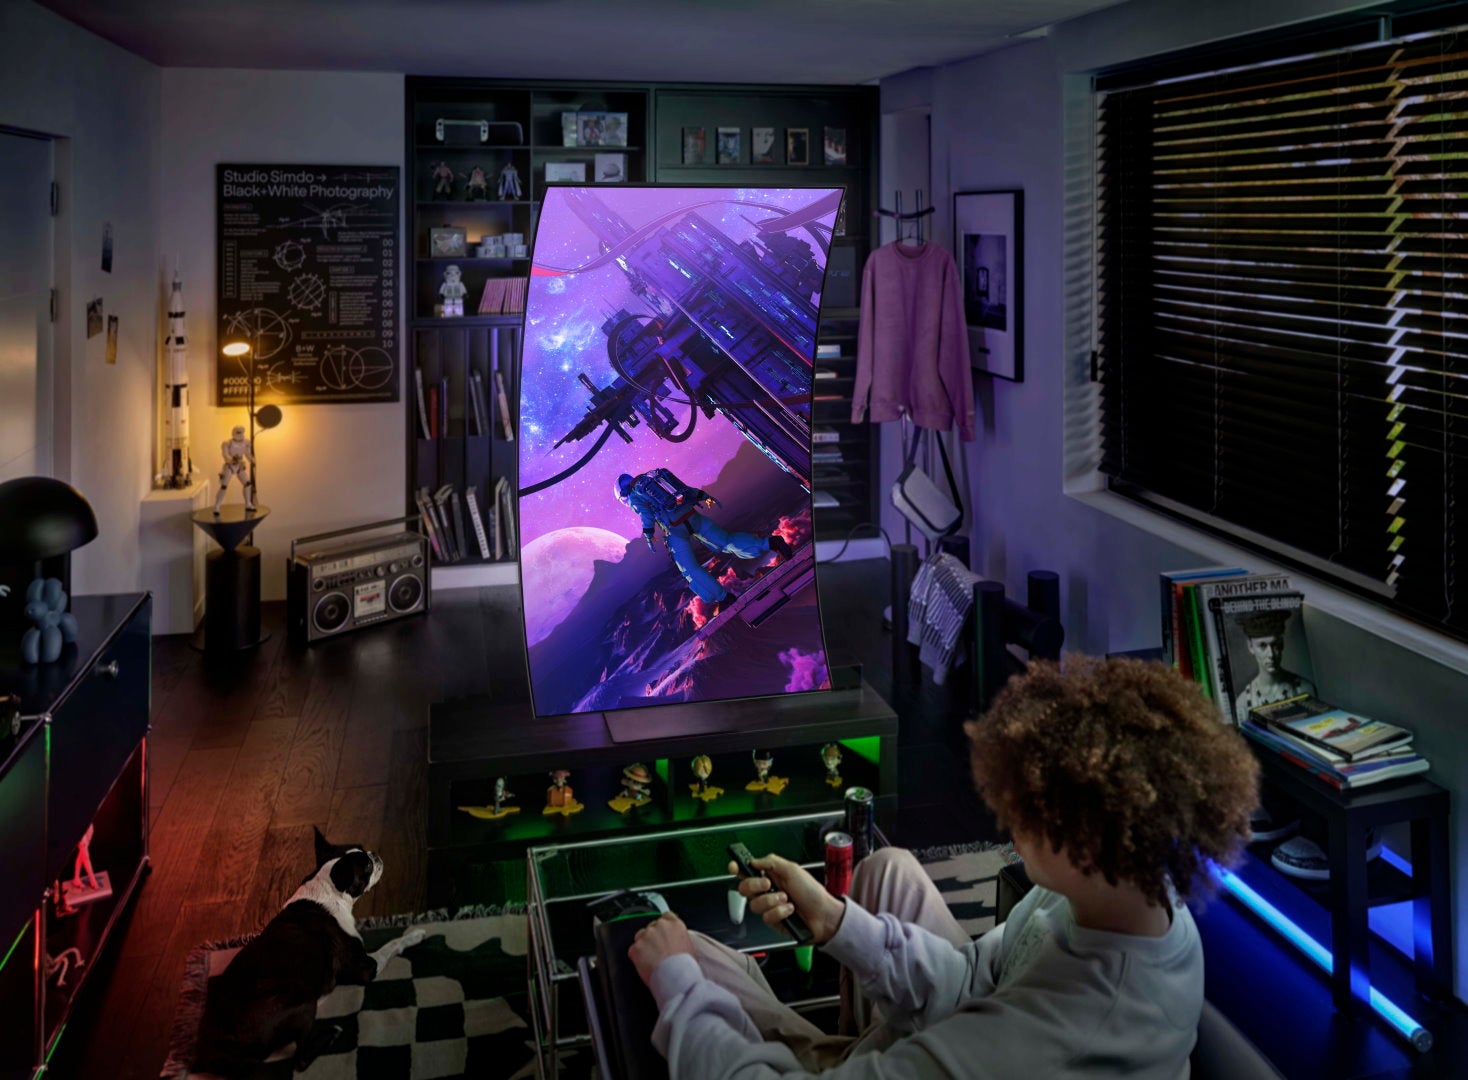 A young person pretends to play a game in portrait mode on the Samsung Odyssey Ark gaming monitor